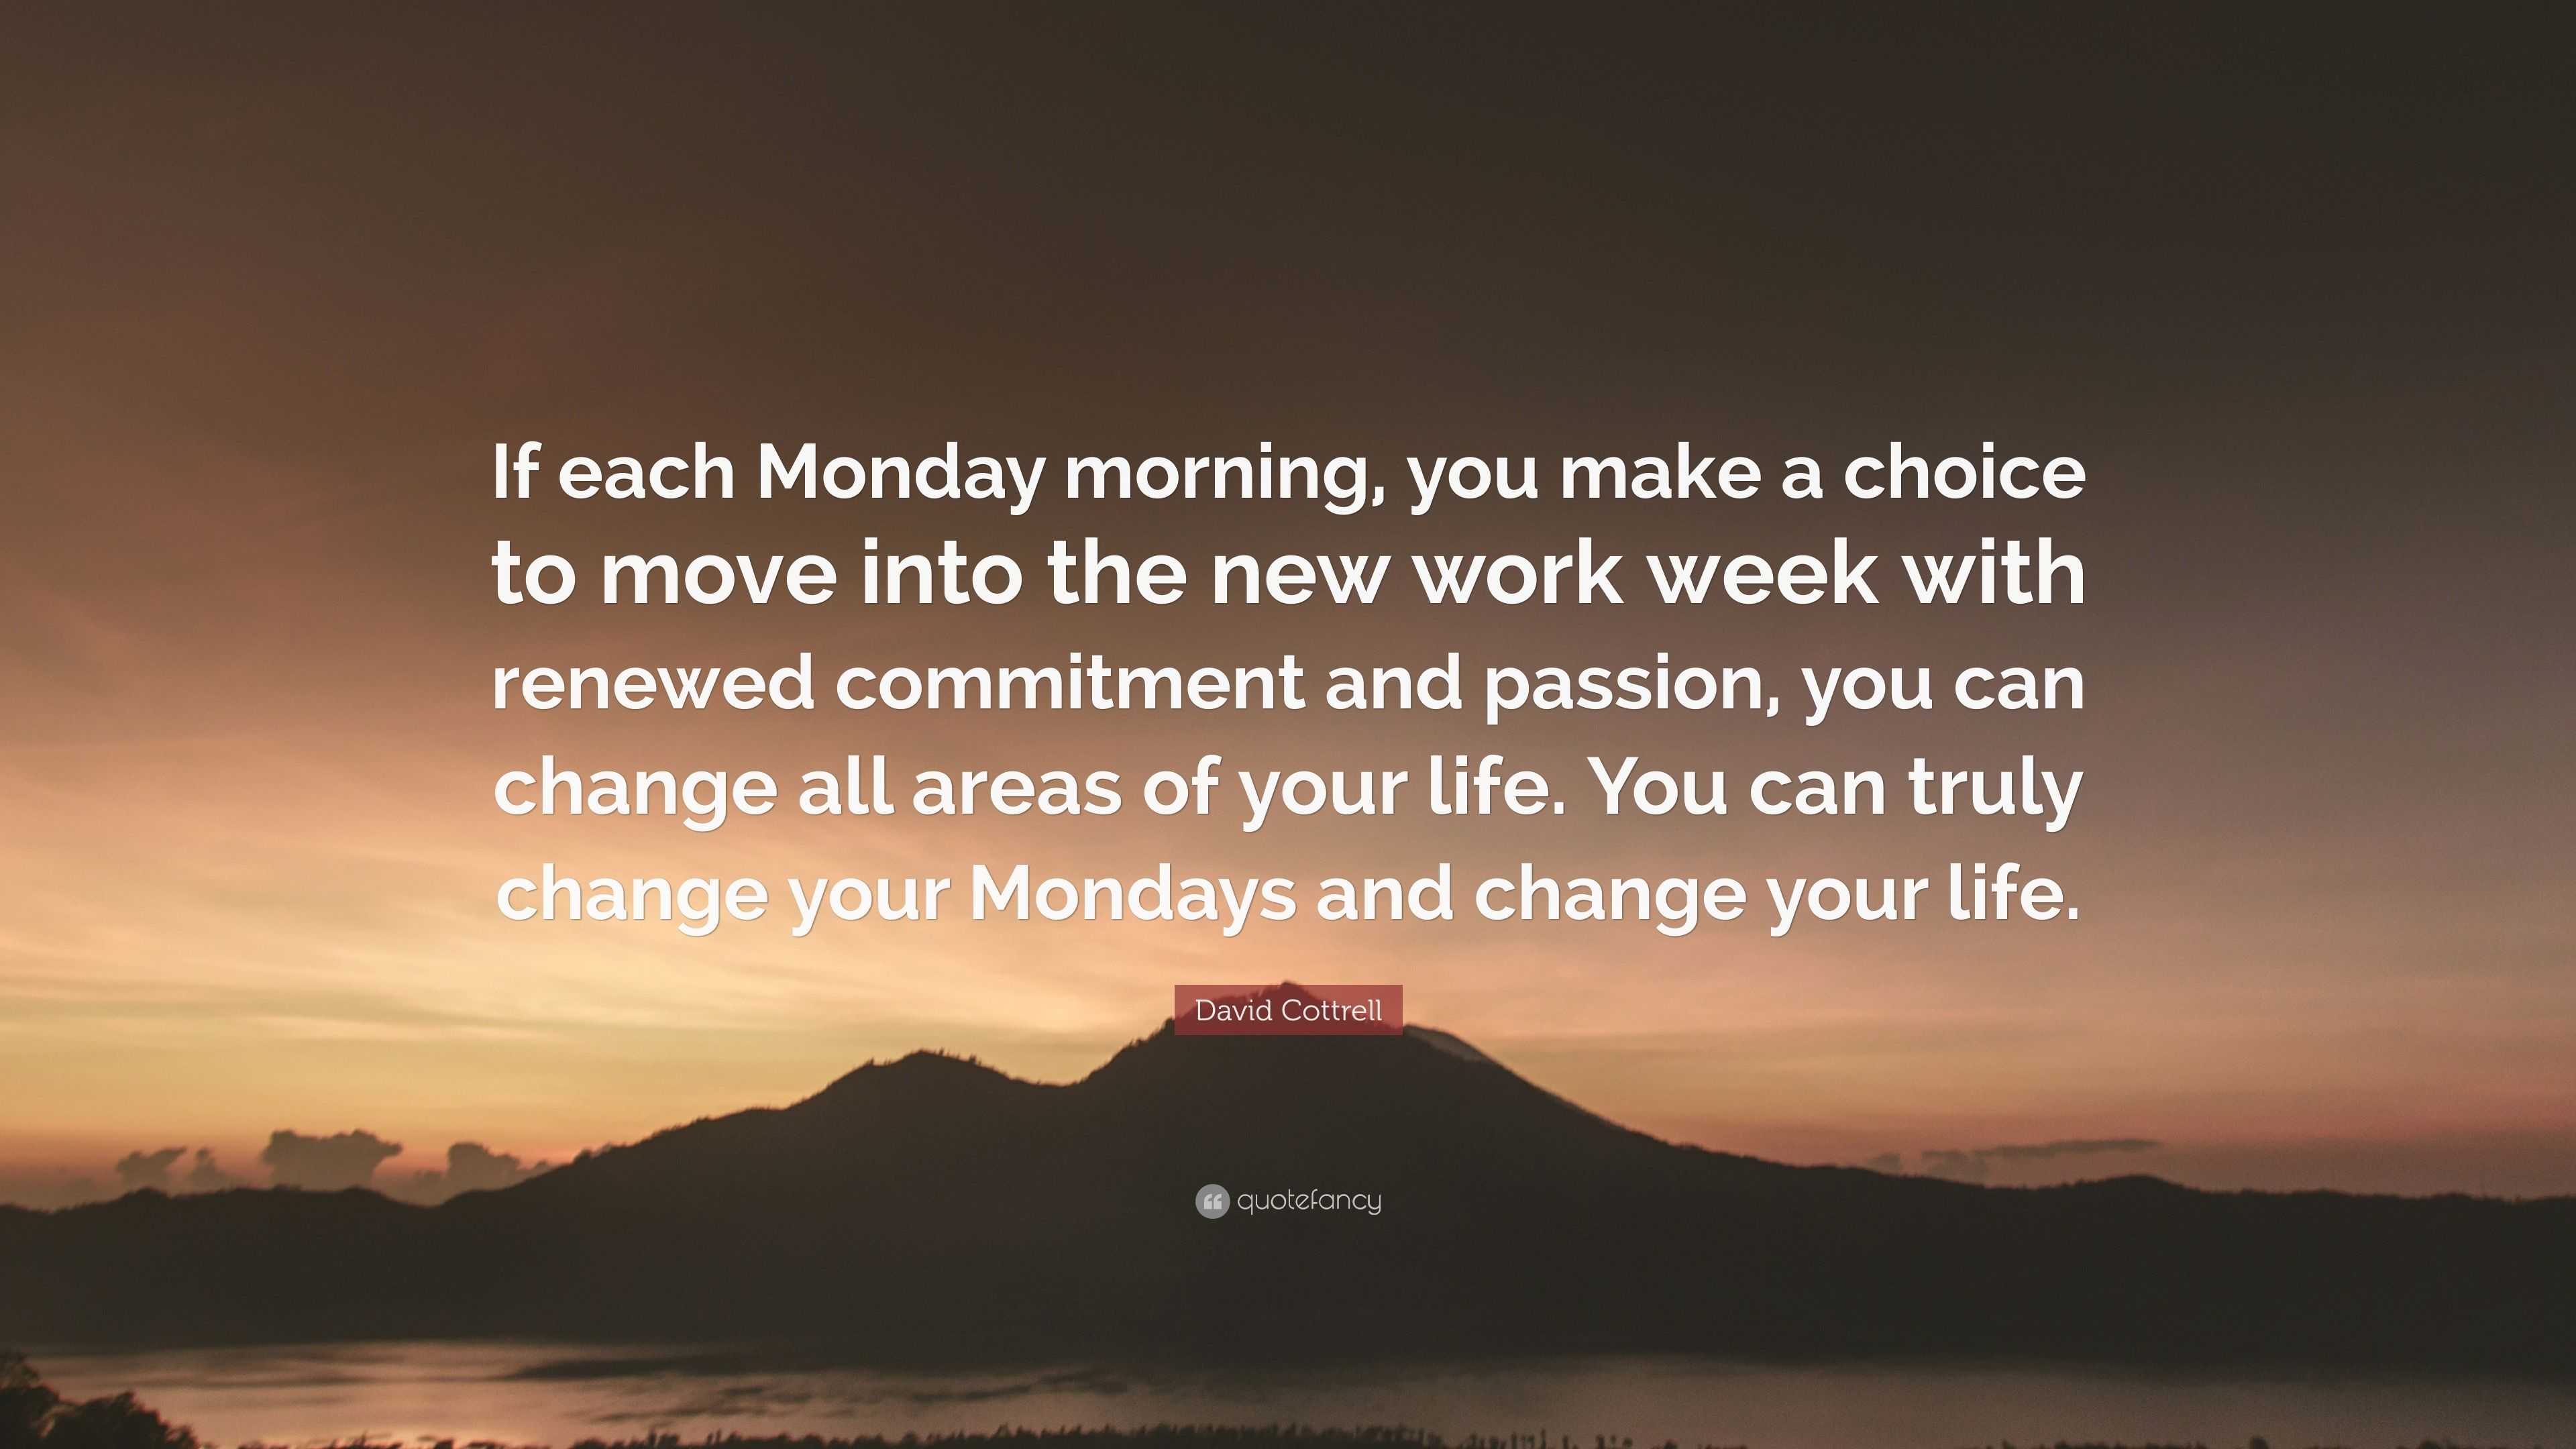 David Cottrell Quote: “If each Monday morning, you make a choice to move  into the new work week with renewed commitment and passion, you can ch”